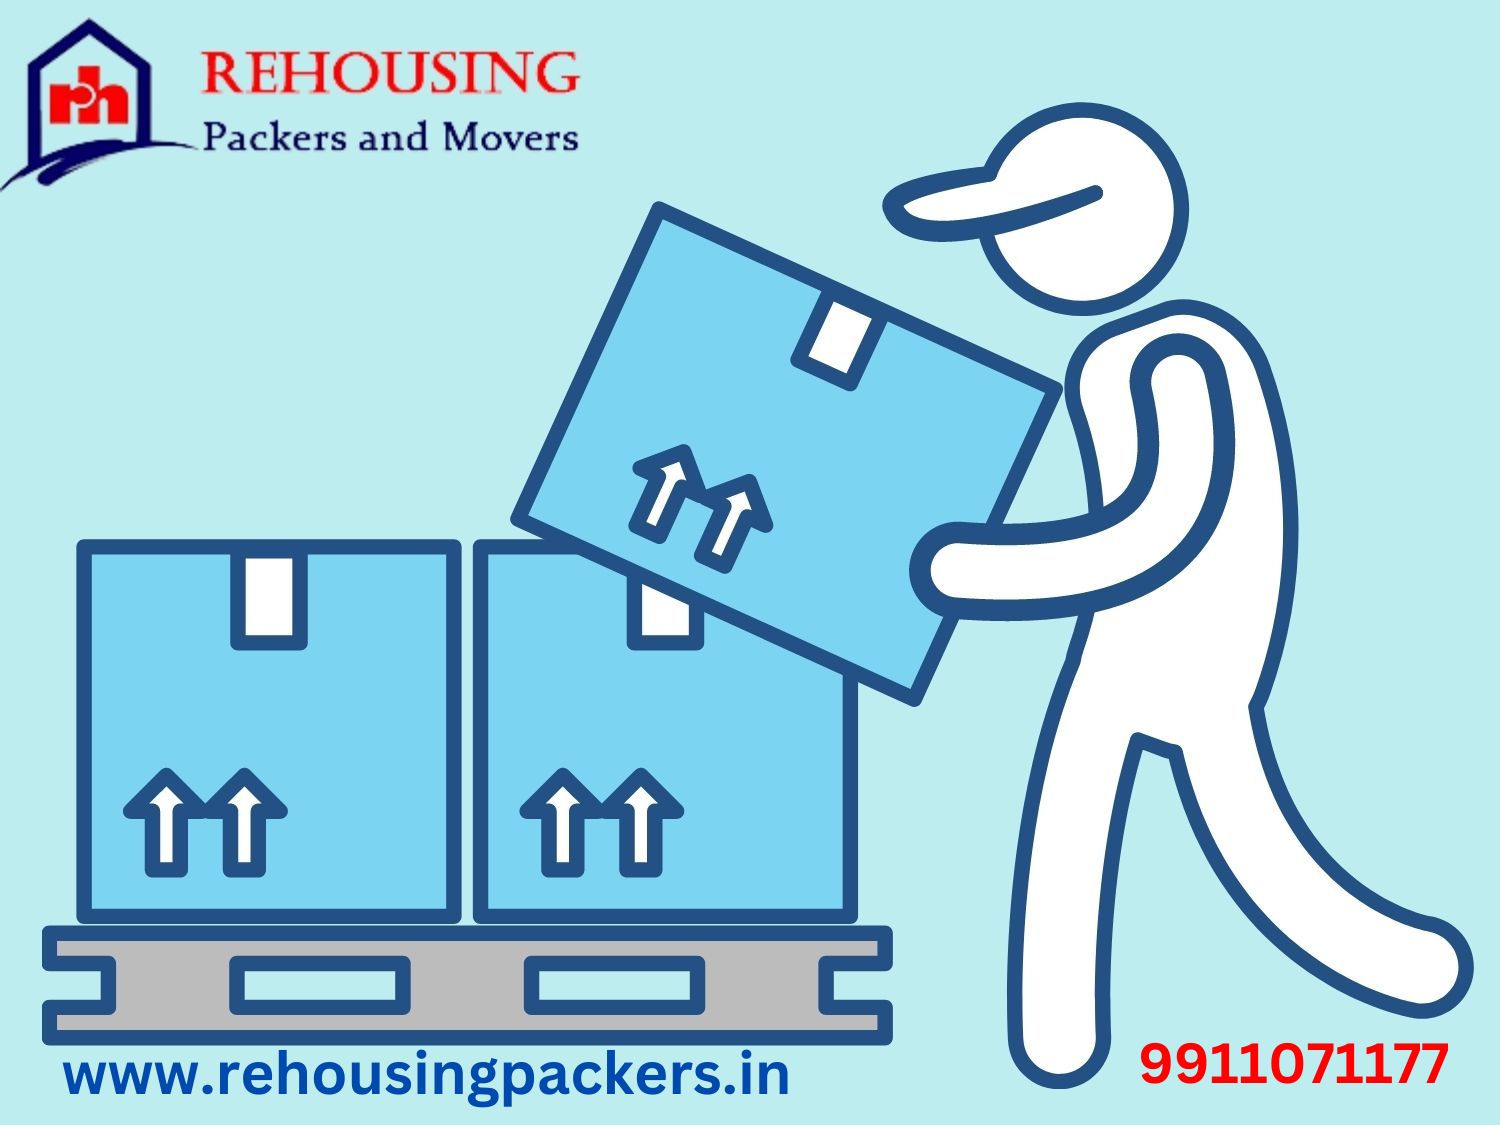 Packers and Movers from Patna to Delhi